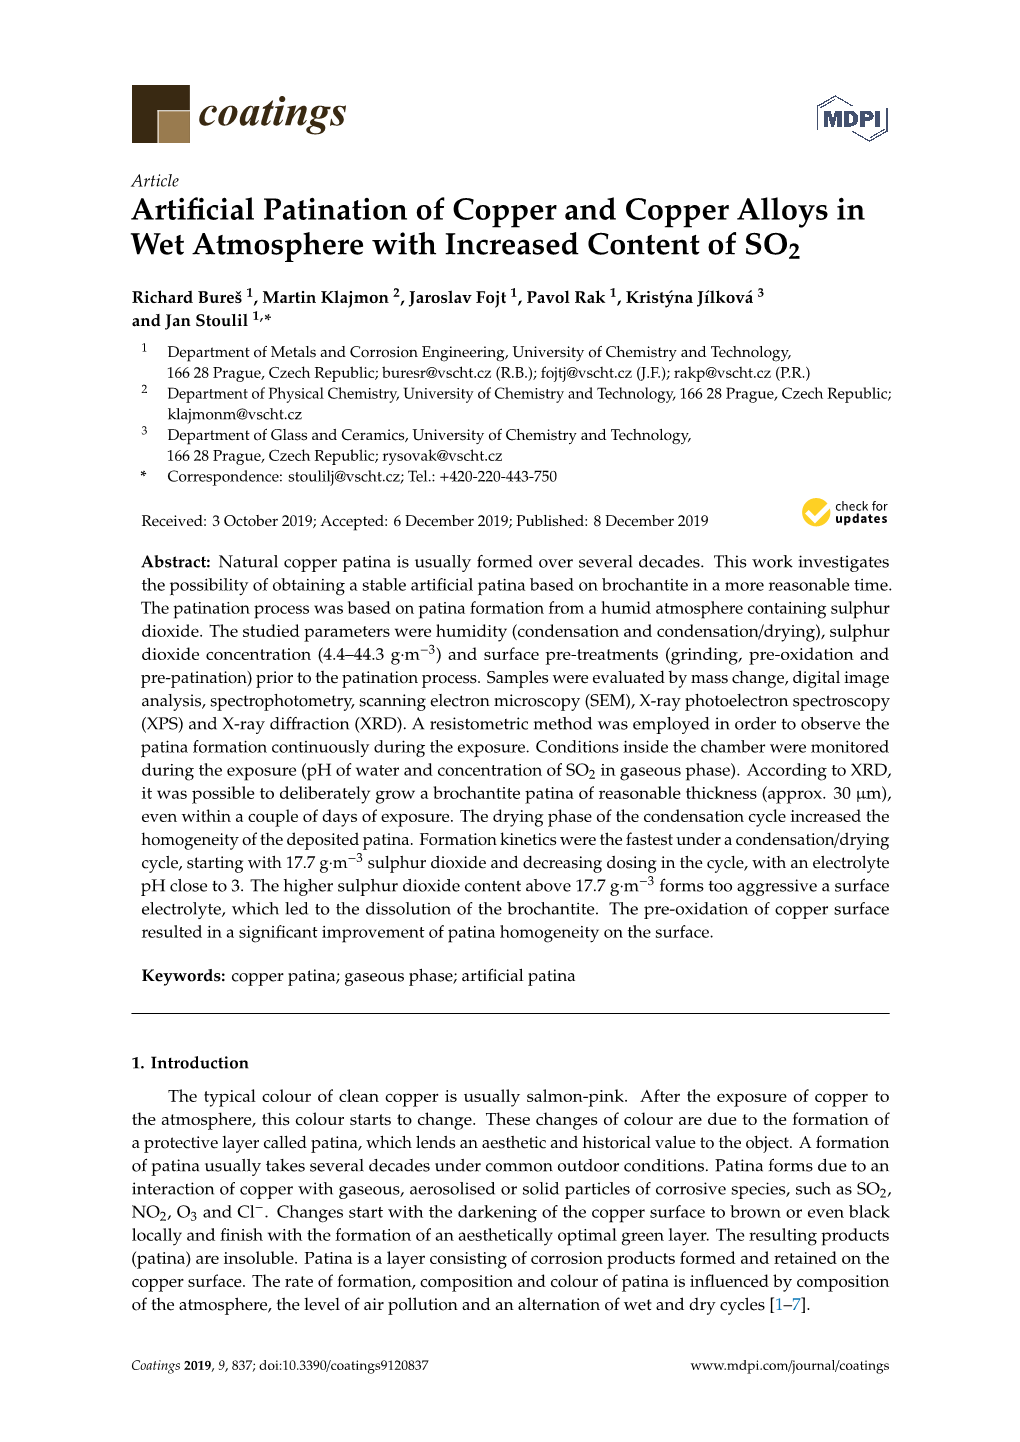 Artificial Patination of Copper and Copper Alloys in Wet Atmosphere